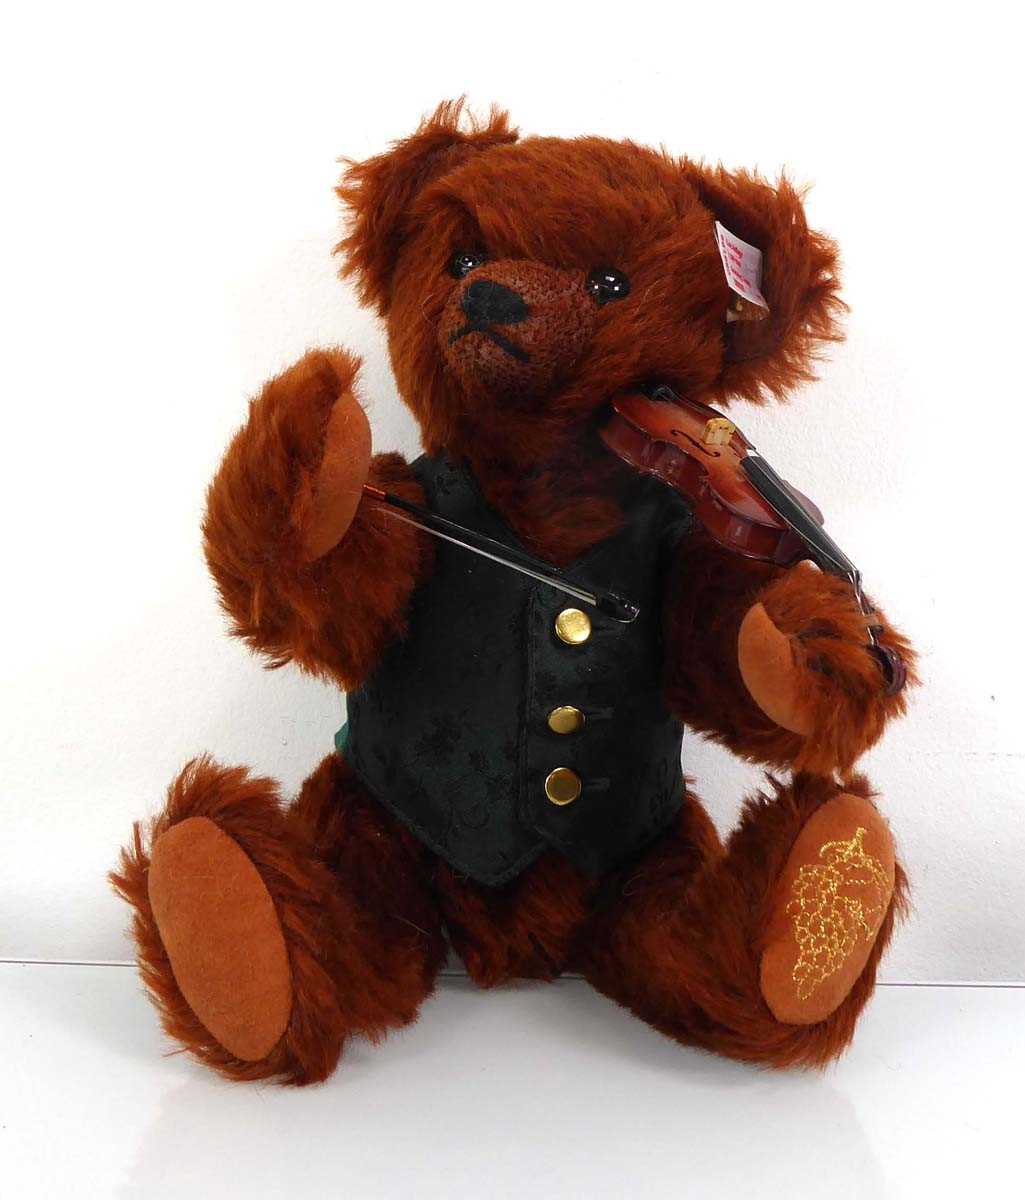 A limited edition fully jointed Steiff Grinzing bear playing the violin